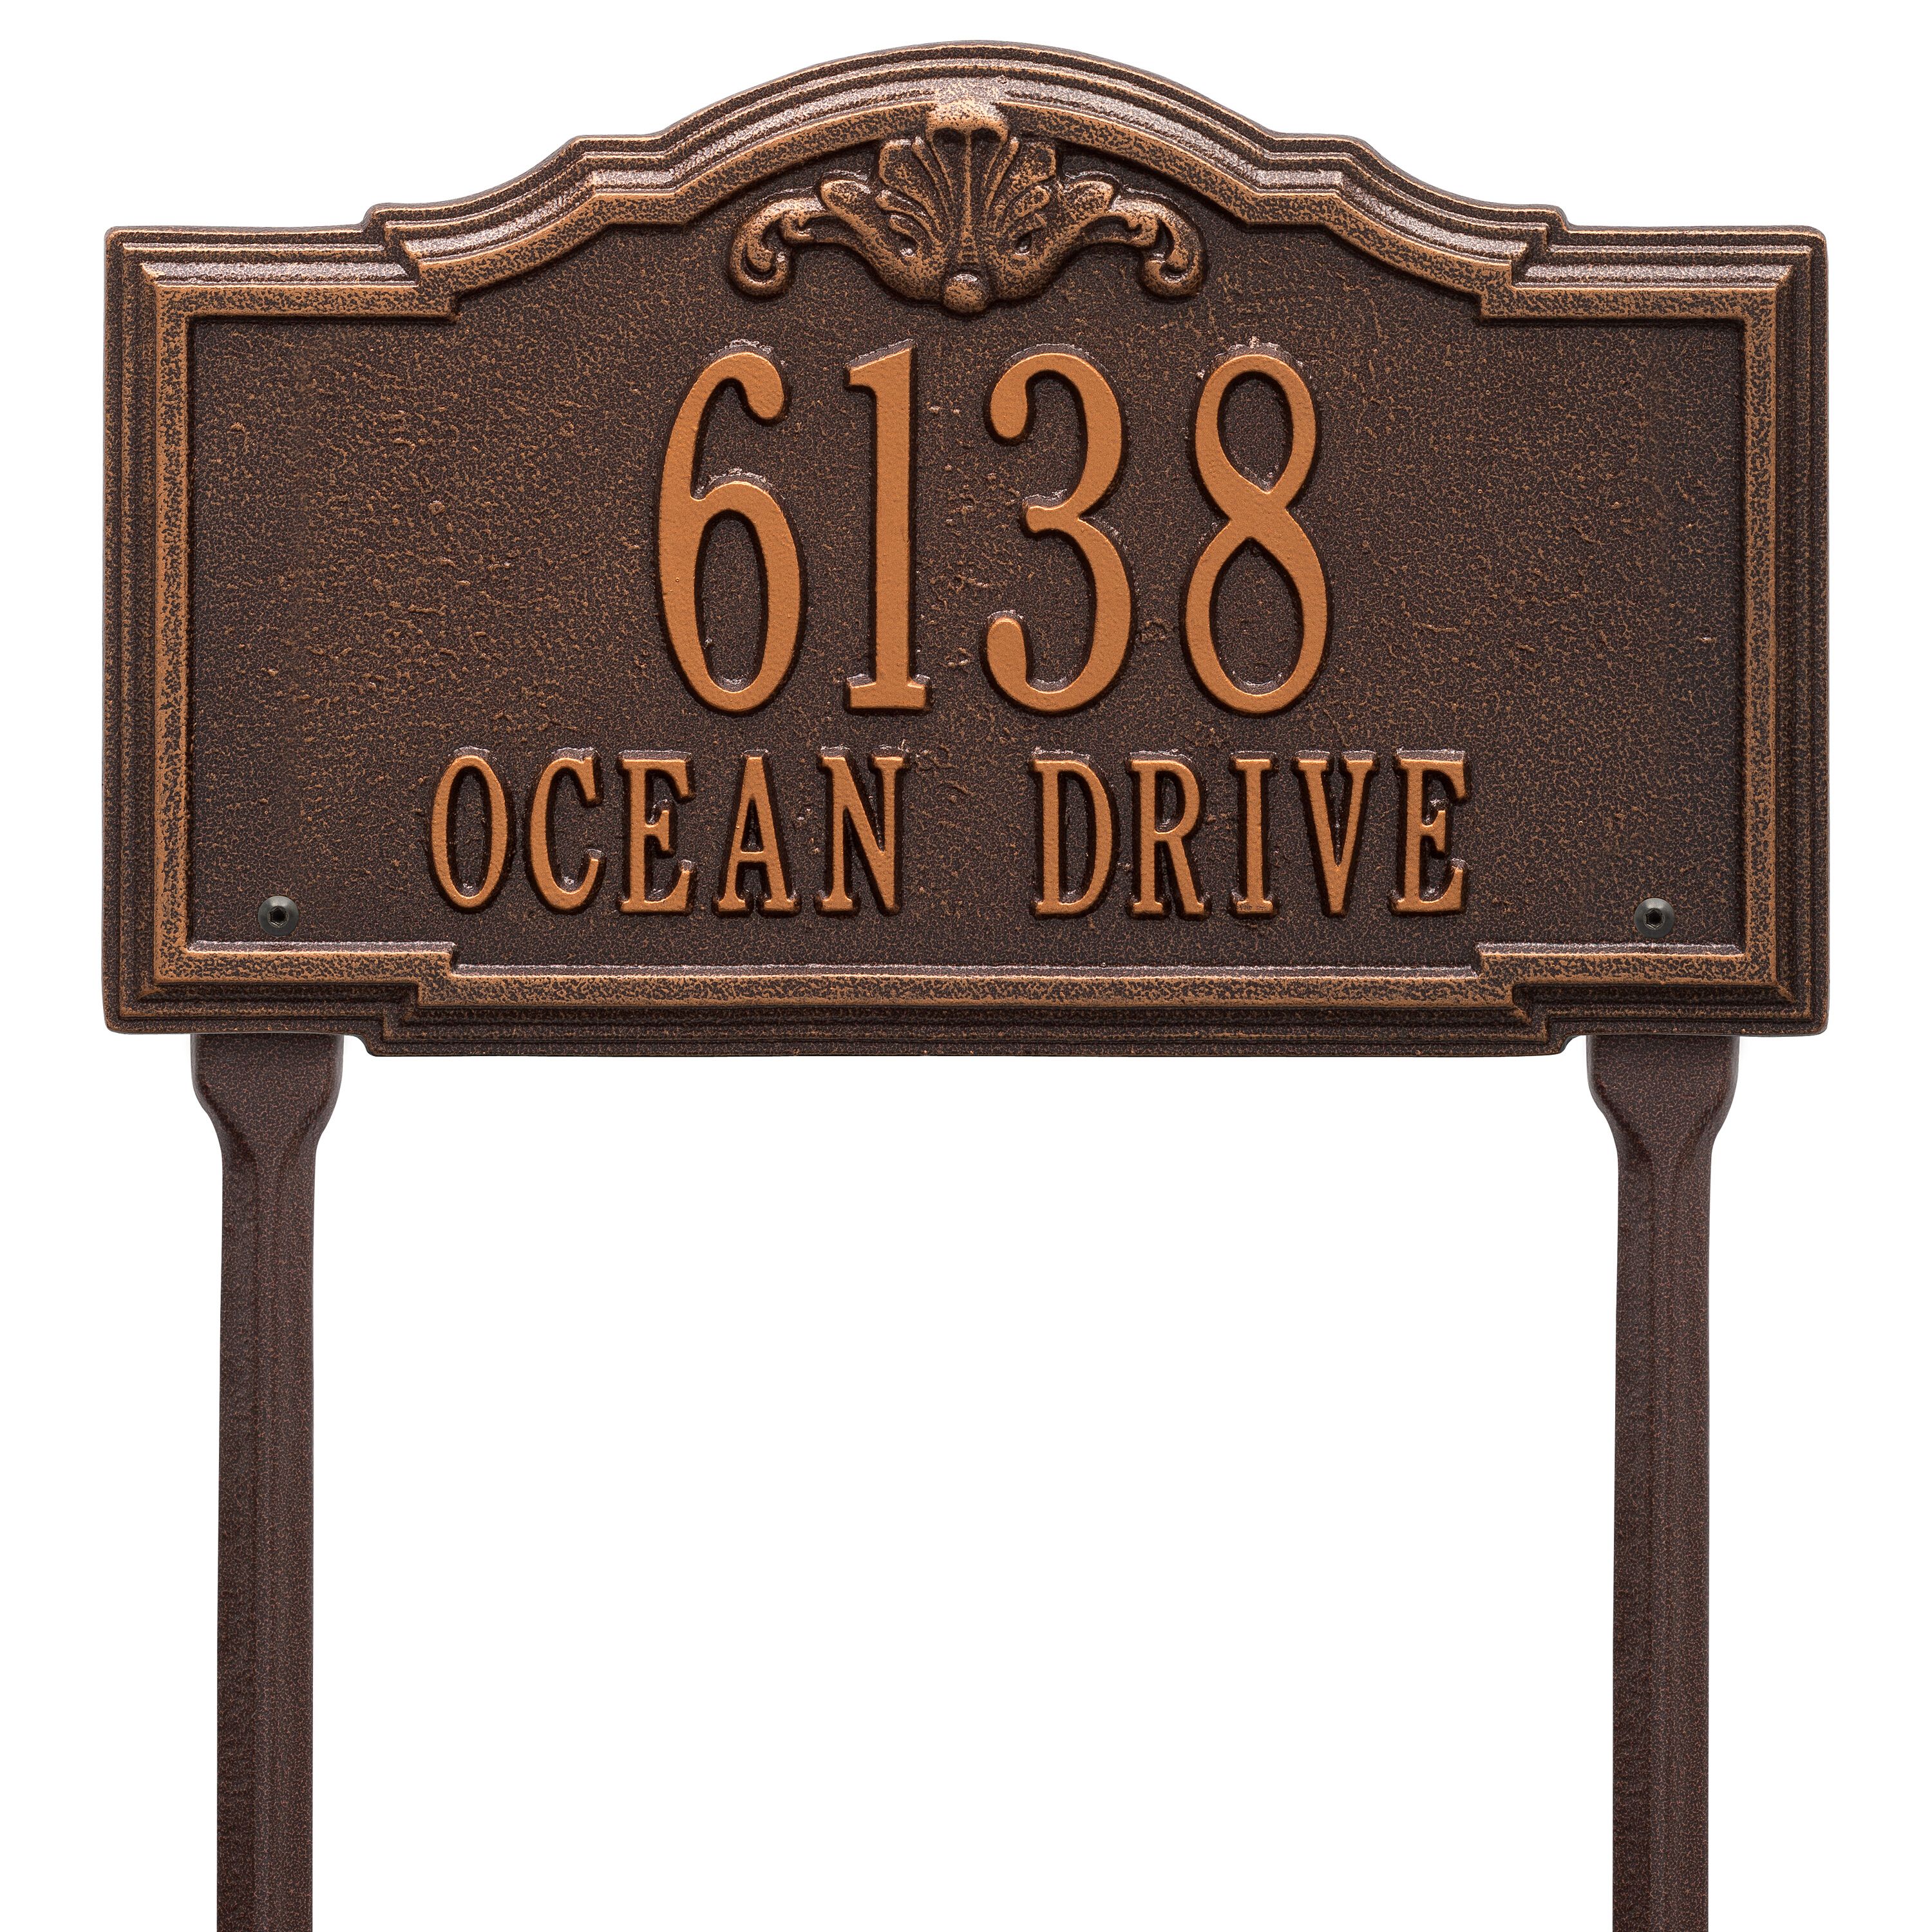 Personalized Gatewood Plaque - Standard - Lawn - 2 Line 